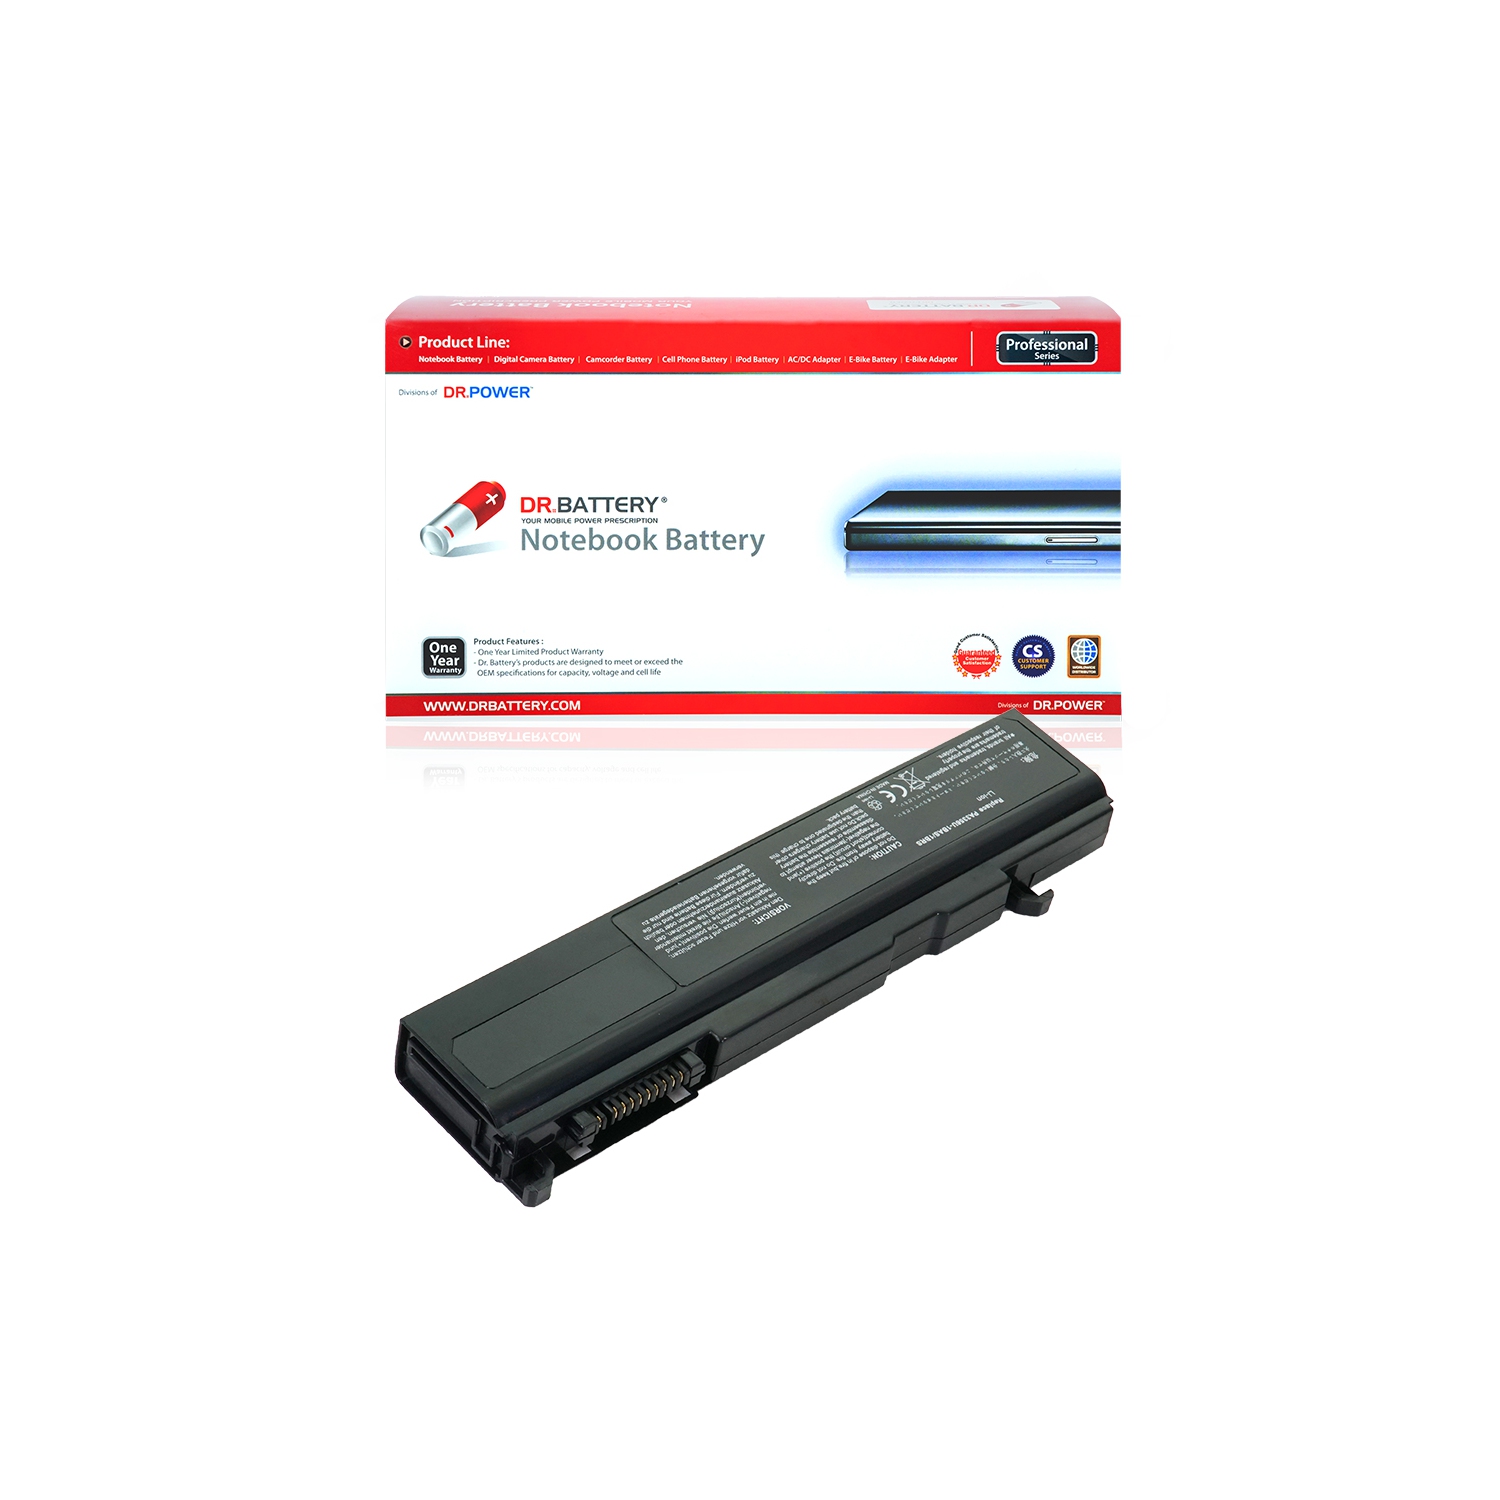 DR. BATTERY - Replacement for Toshiba Dynabook Satellite T11 / T12 / T20 / K21 / PA3357U-1BRL / PA3357U-2BRL / PA3357U-3BRL [10.8V / 4400mAh / 48Wh] *** Free Shipping***